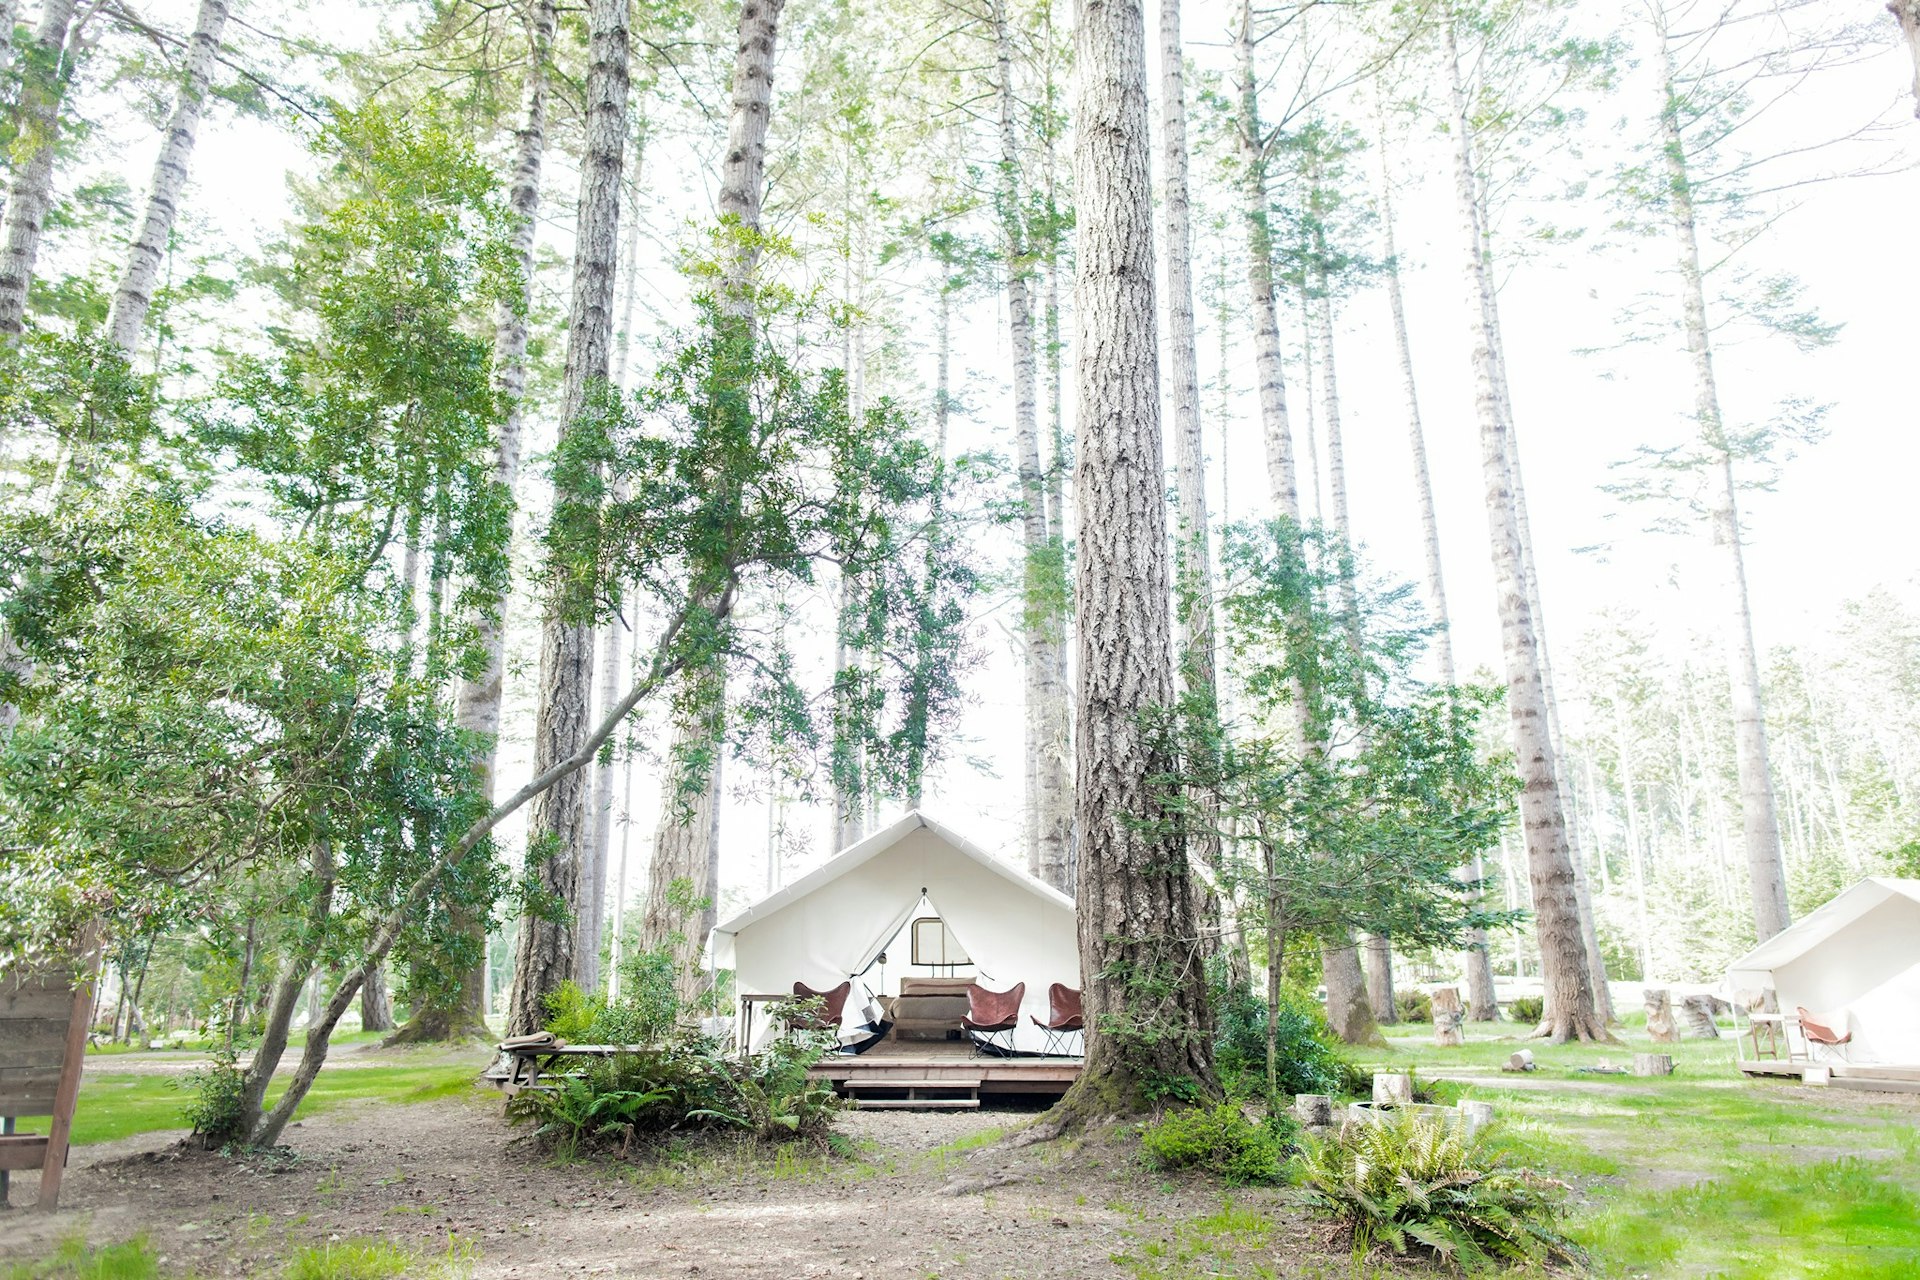 Luxurious tents under redwood trees at Mendocino Grove camping, Mendocino, California USA